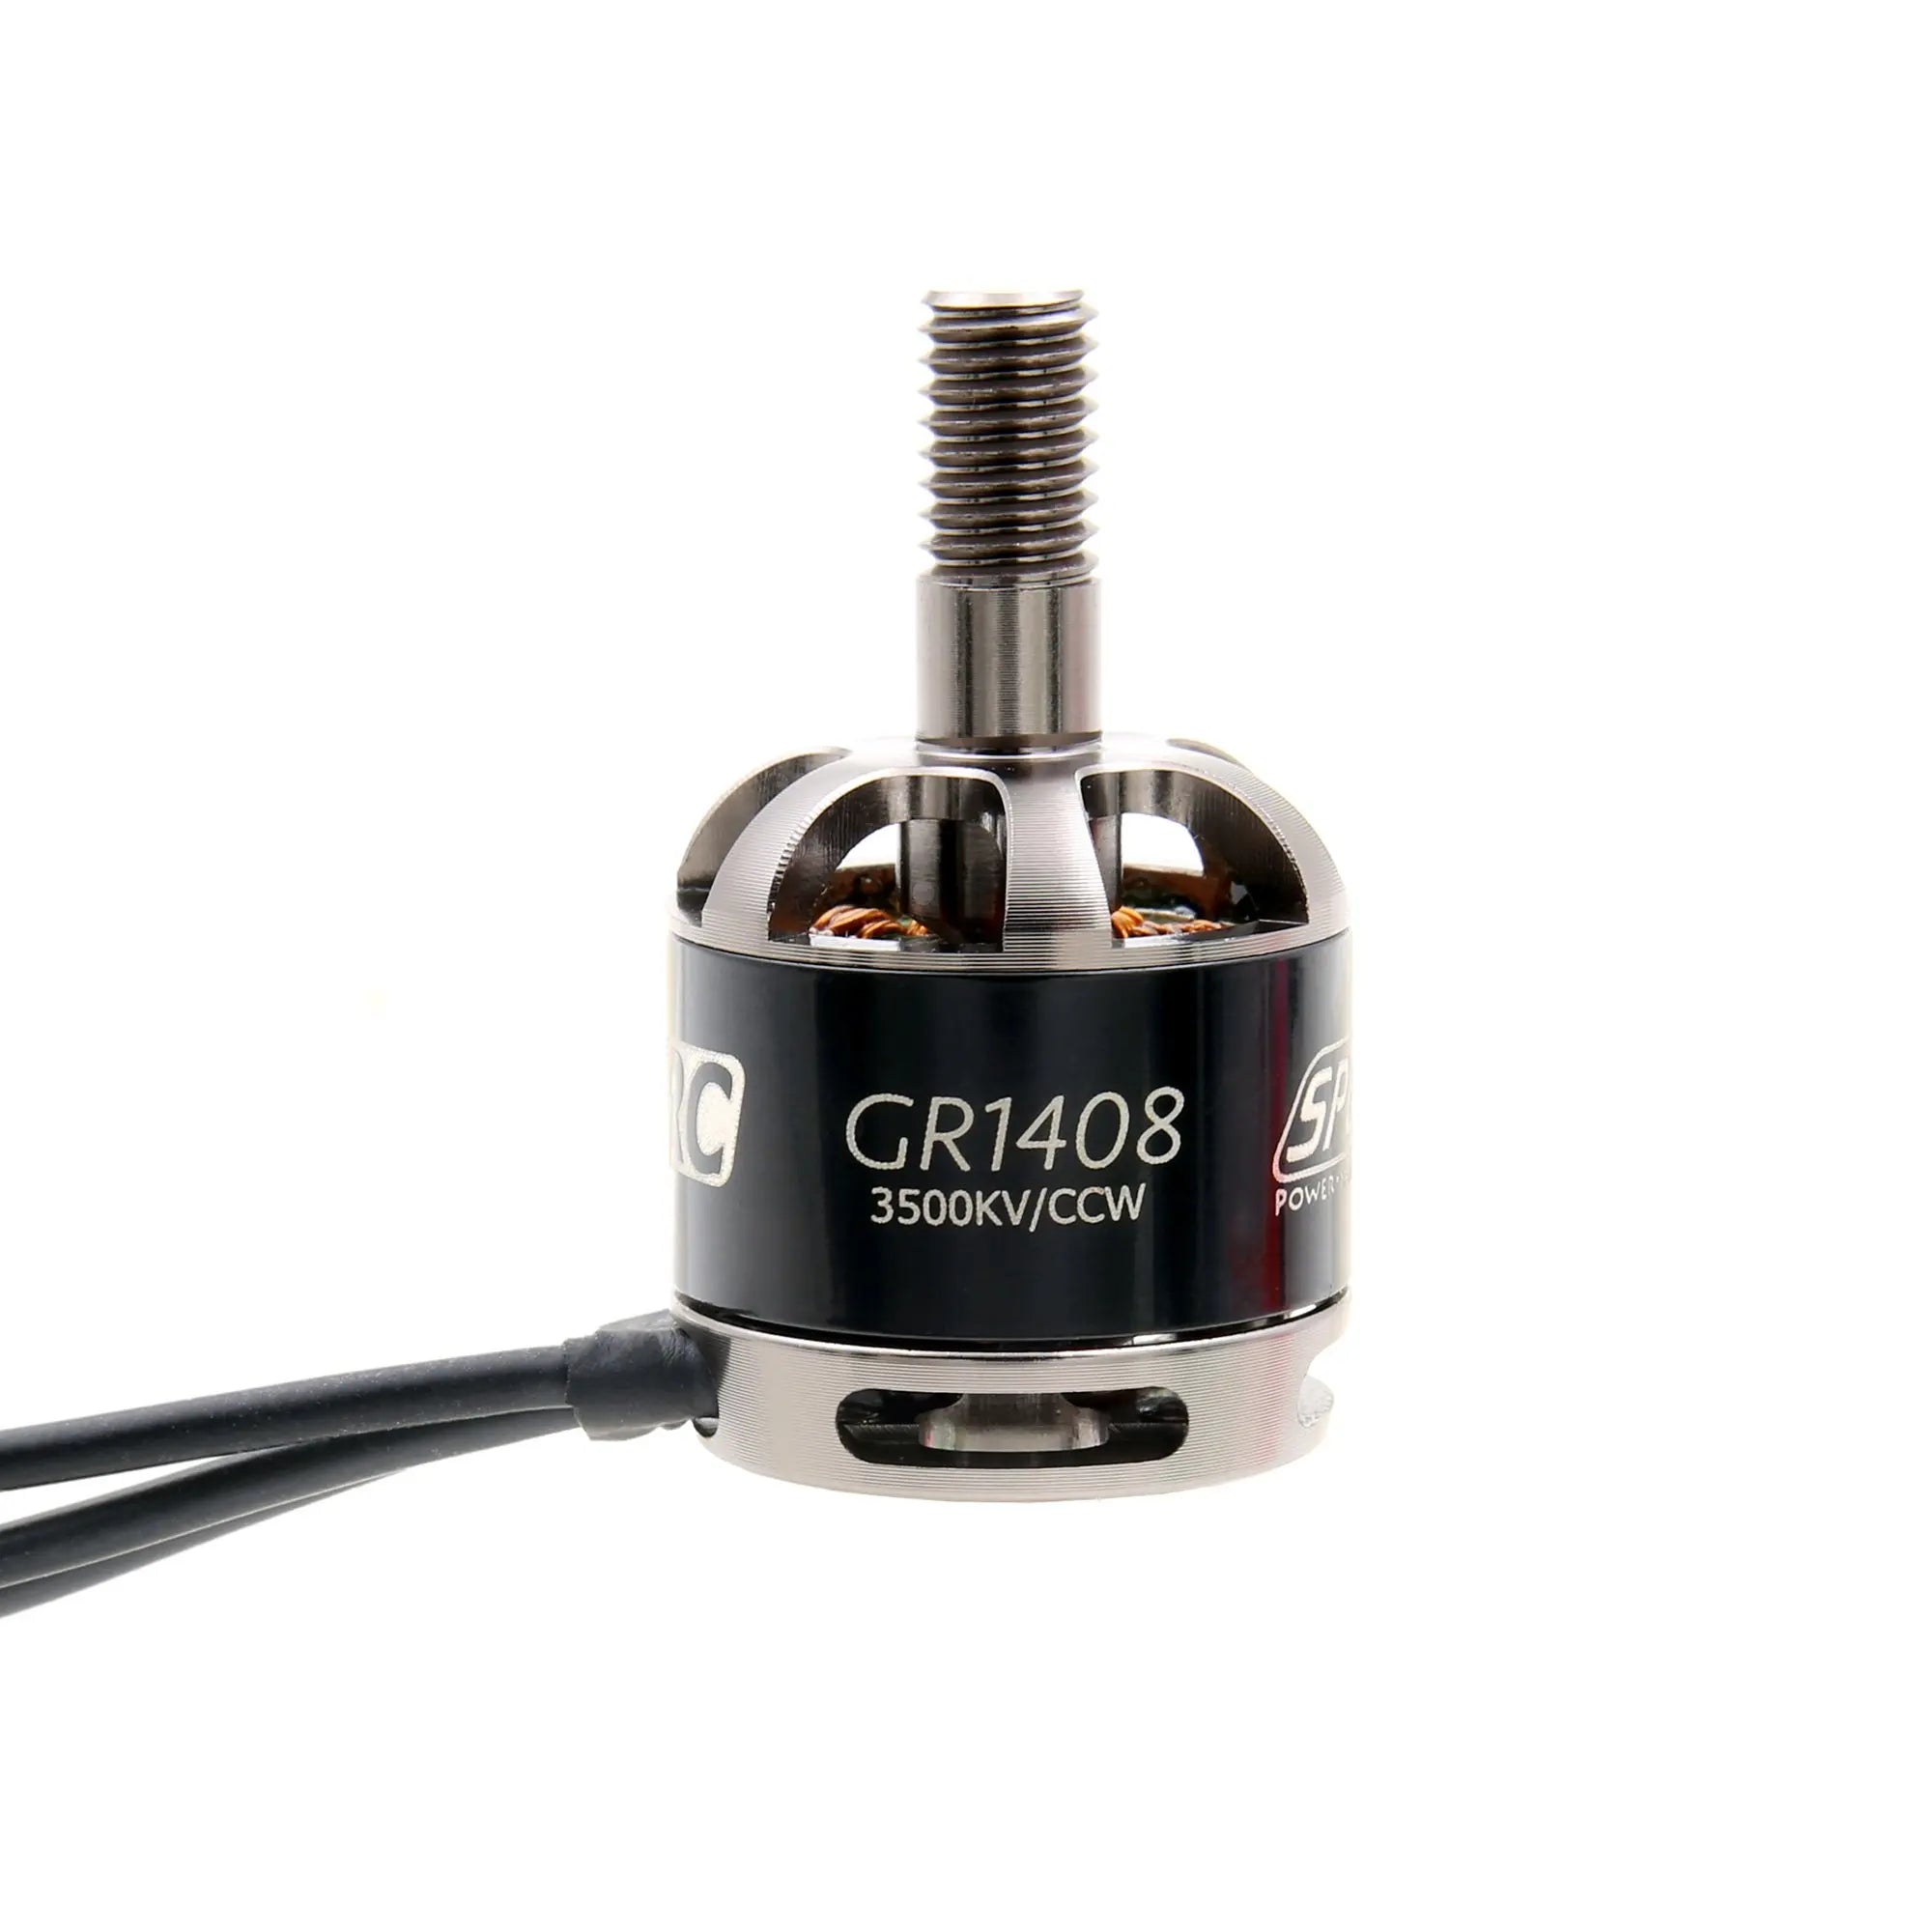 GEPRC GR1408 3500KV Motor, enameled wire stator coil ensures stable power output throughout the throttle range . durable